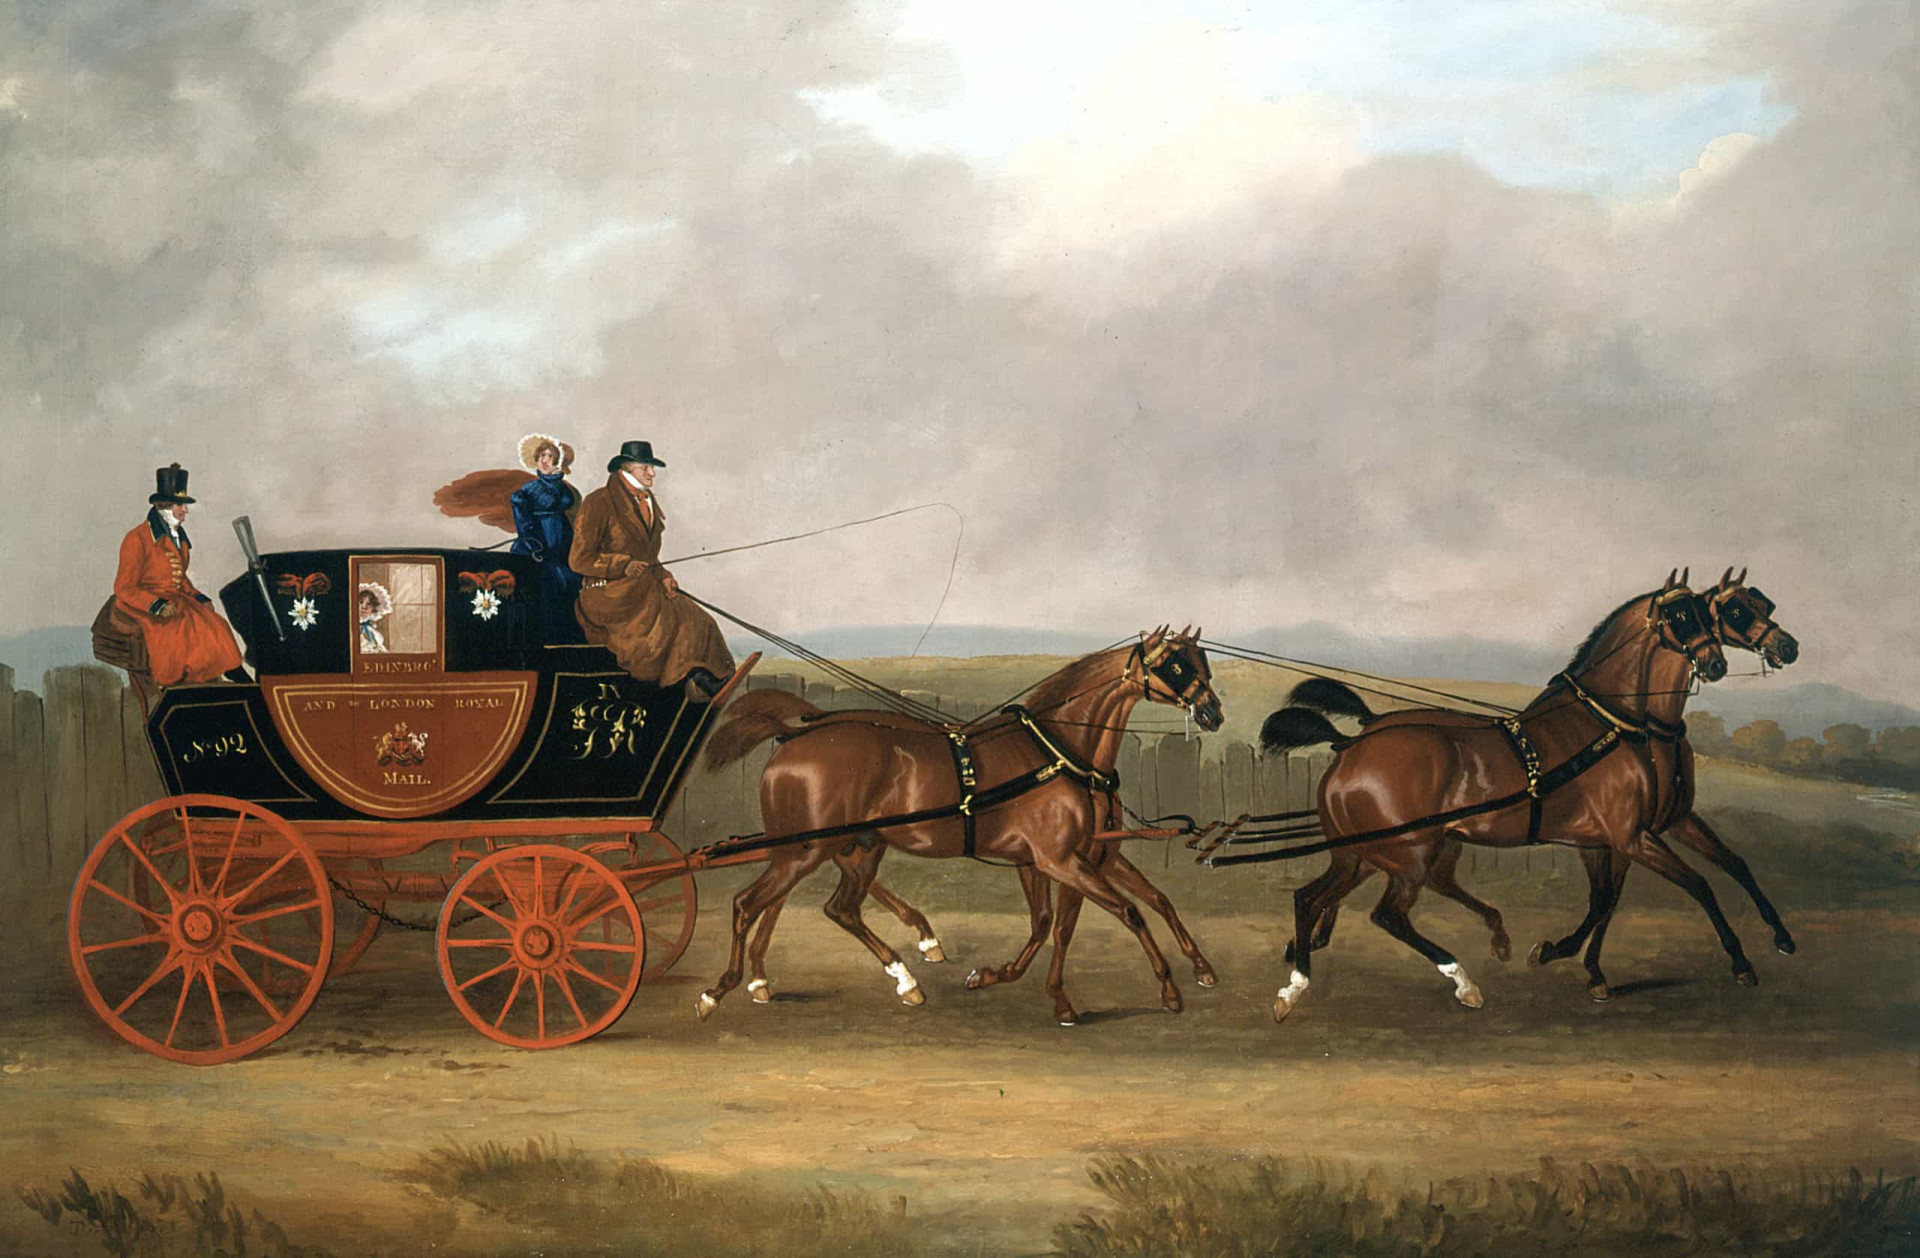 <p>The improvement in the road network in England in the mid-18th century led to the introduction of the mail coach in 1784, providing a combined passenger and mail delivery service. The first mail coach in Britain traveled from London to Edinburgh in about 1785, and to Glasgow in 1788.</p><p><a href="https://www.msn.com/en-us/community/channel/vid-7xx8mnucu55yw63we9va2gwr7uihbxwc68fxqp25x6tg4ftibpra?cvid=94631541bc0f4f89bfd59158d696ad7e">Follow us and access great exclusive content every day</a></p>